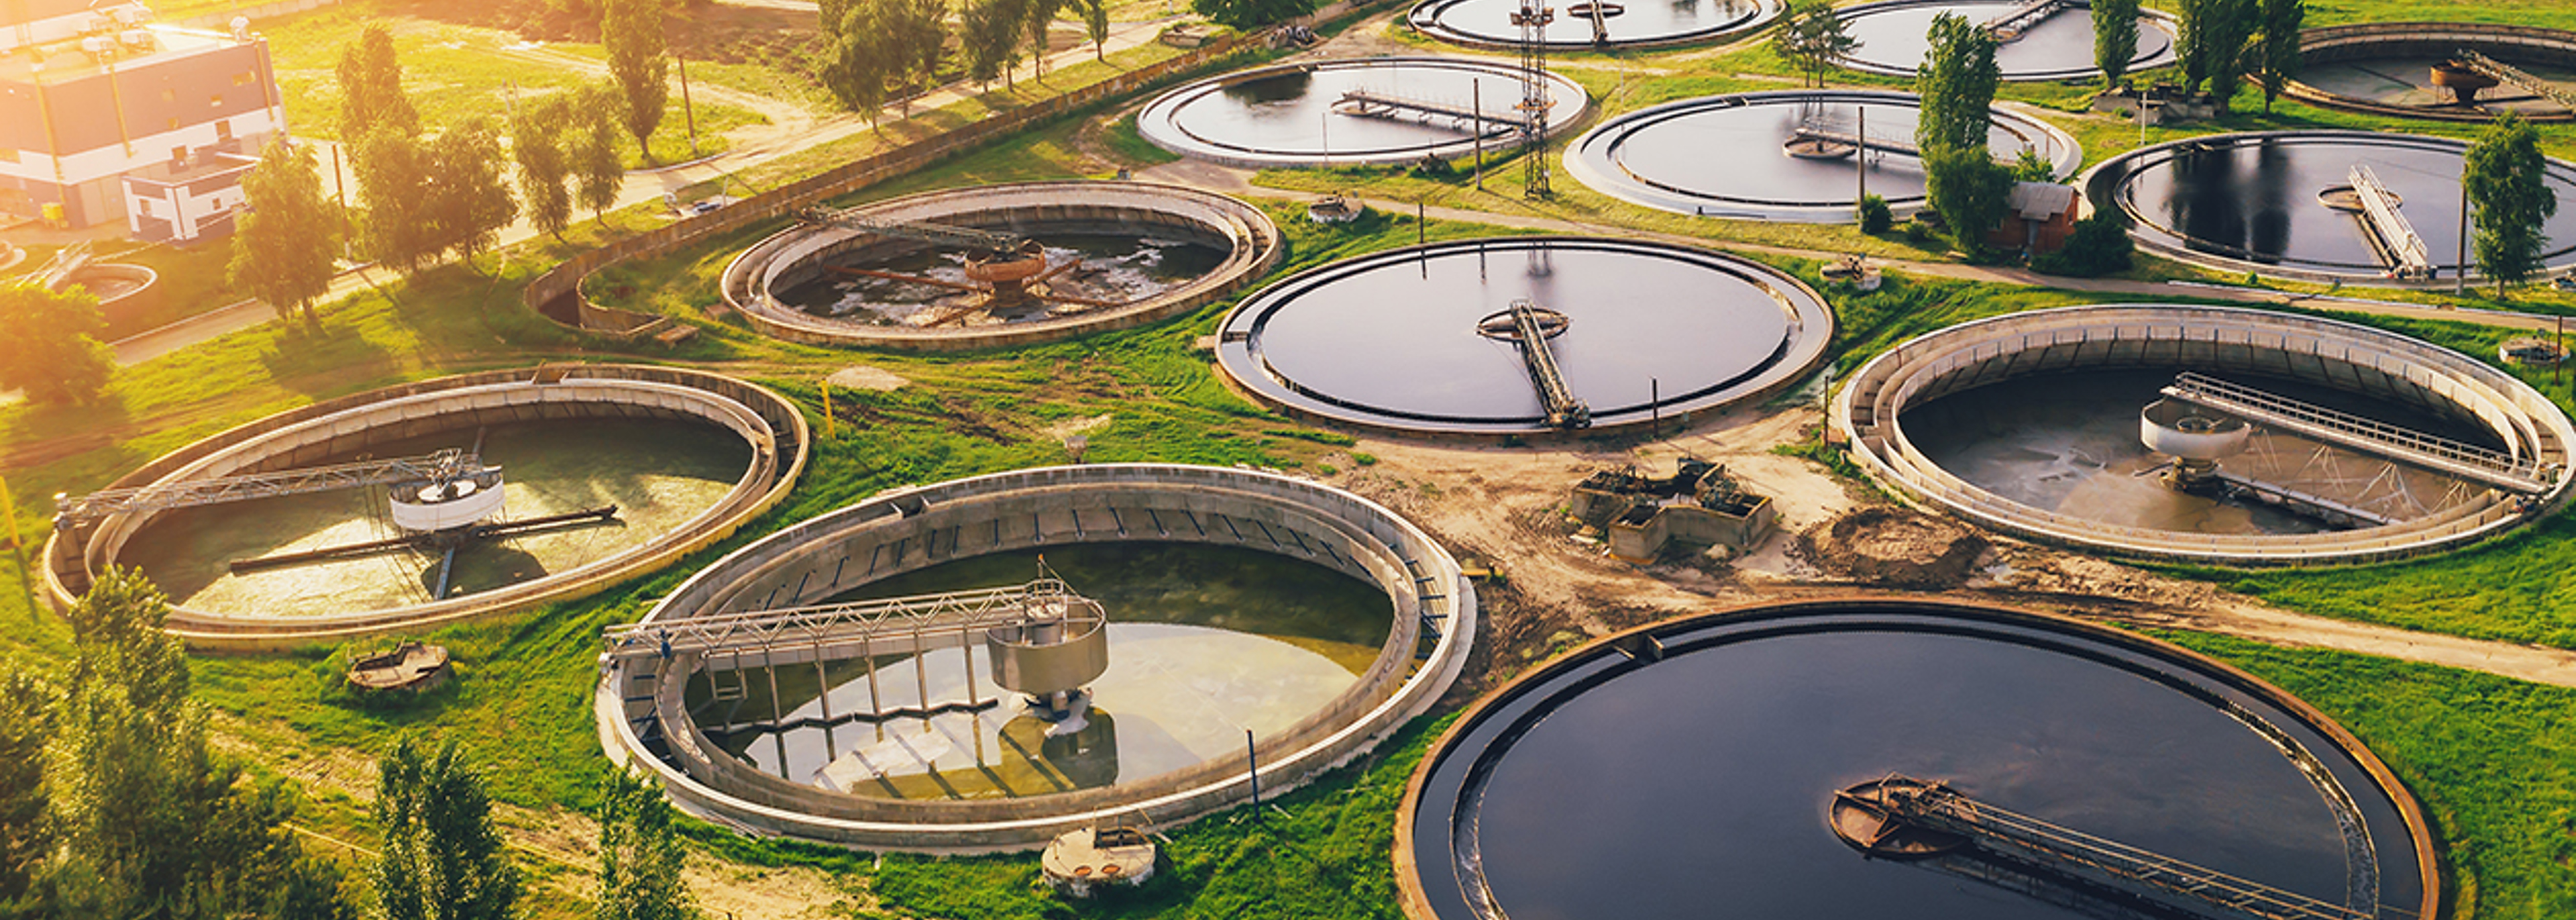 Wastewater systems under pressure from climate change